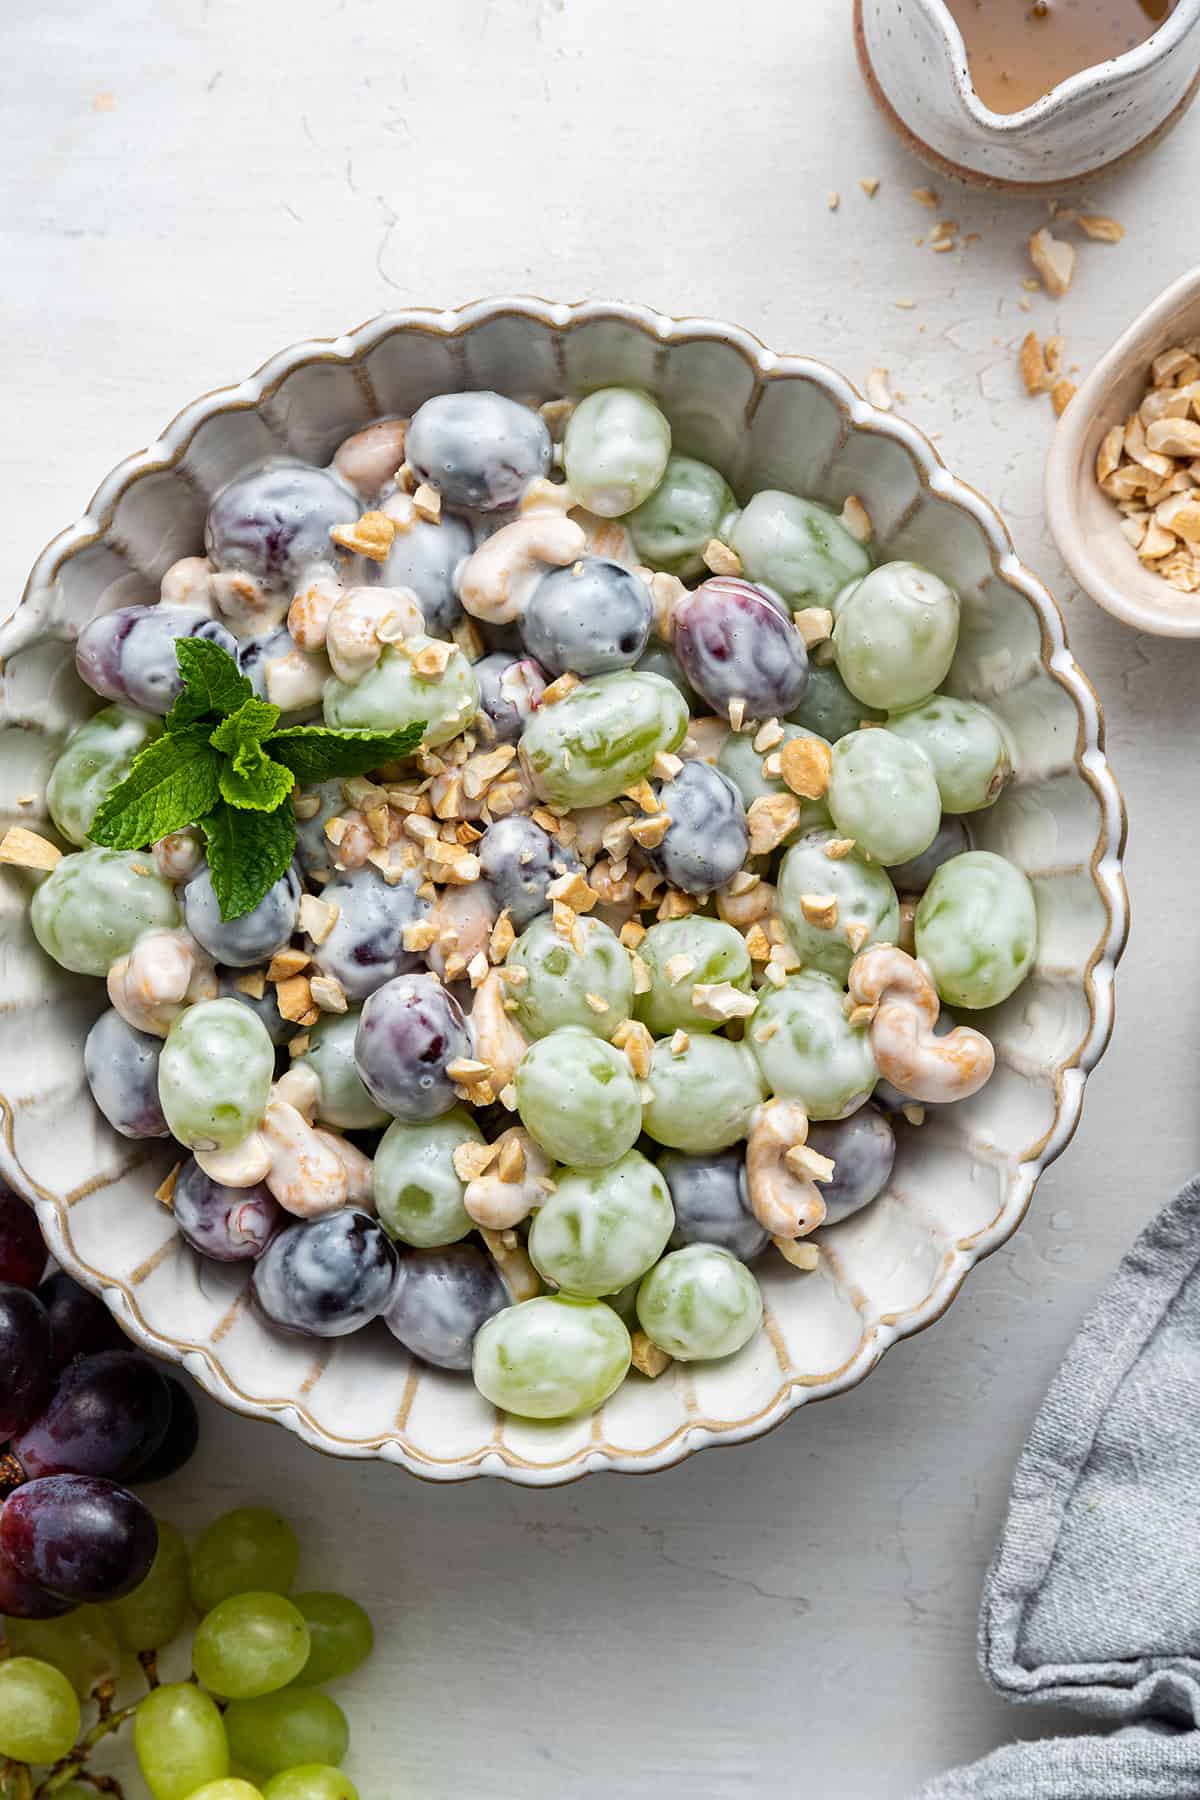 Overhead view of a bowl of salad with red grapes, green grapes, cashews, and yogurt